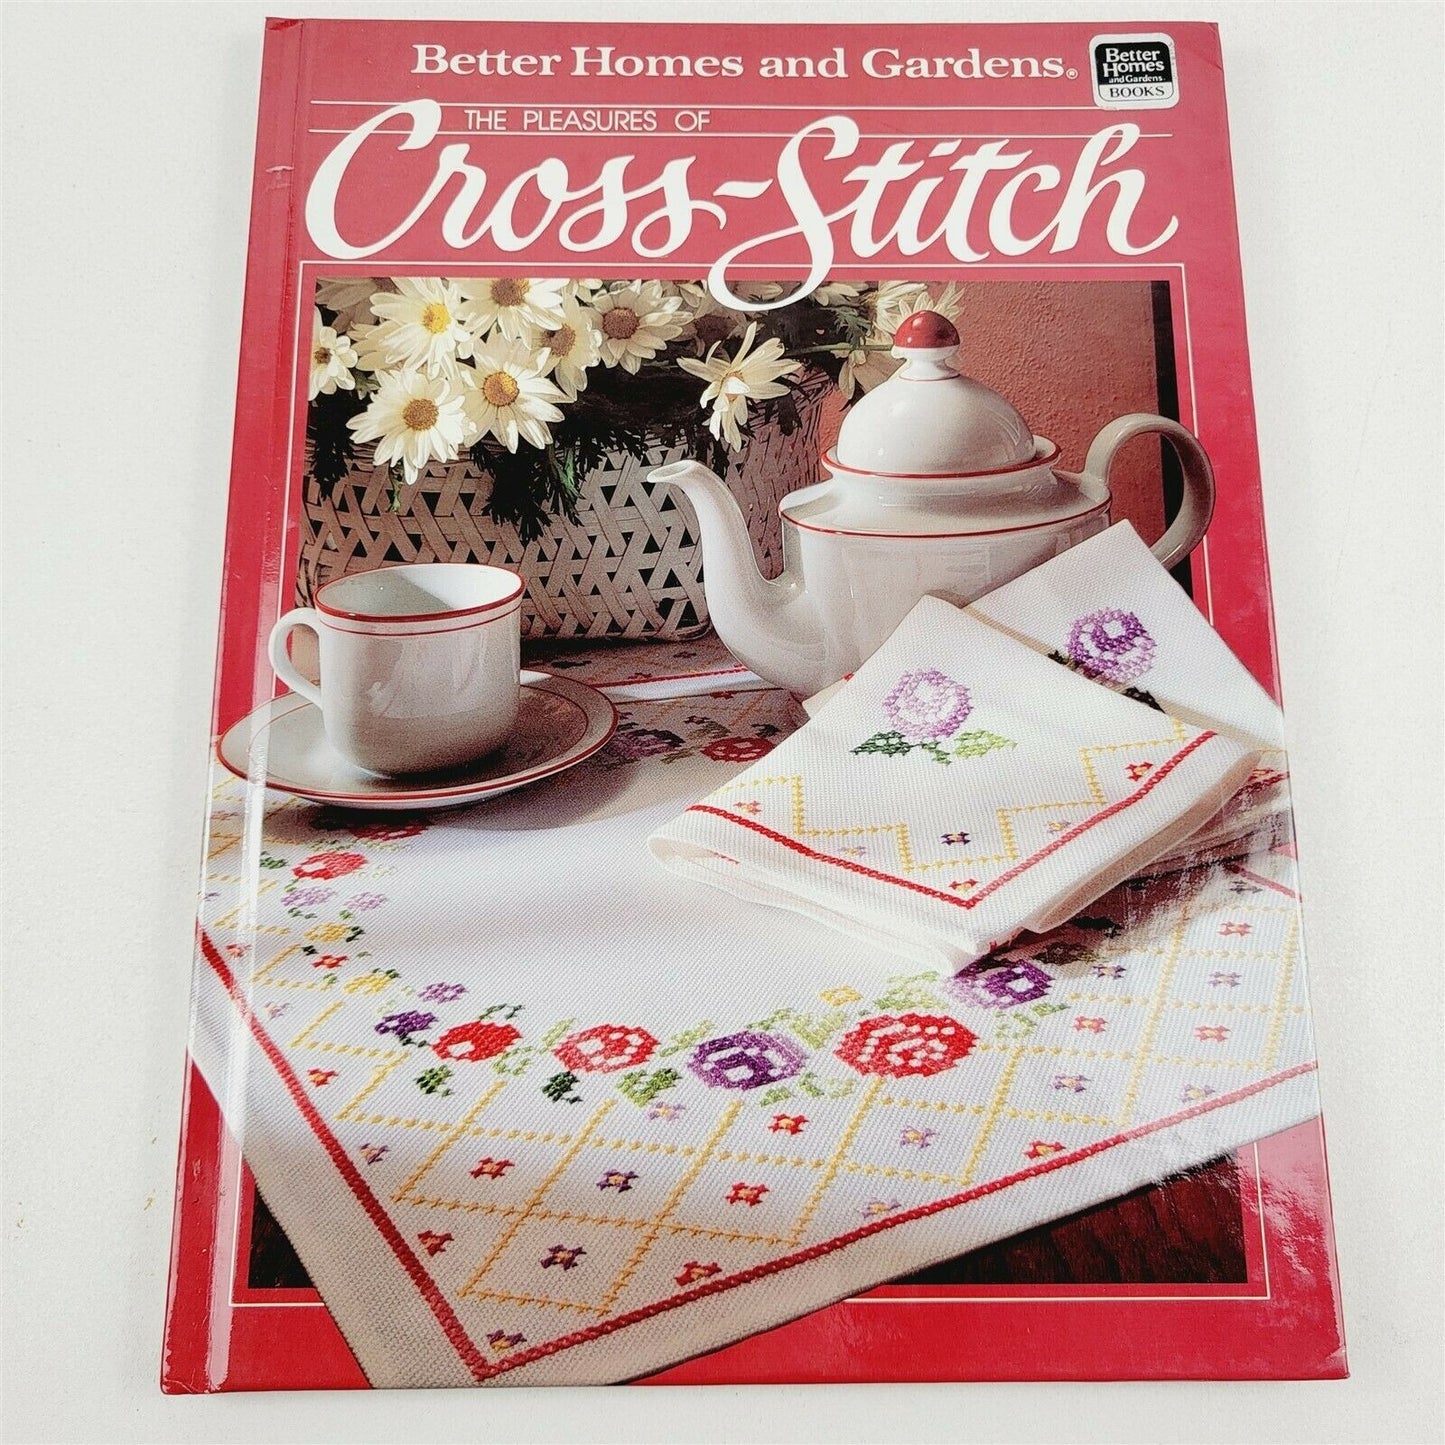 5 Better Homes & Gardens Doll Making Quilting Crochet Cross-Stitch Home Crafts